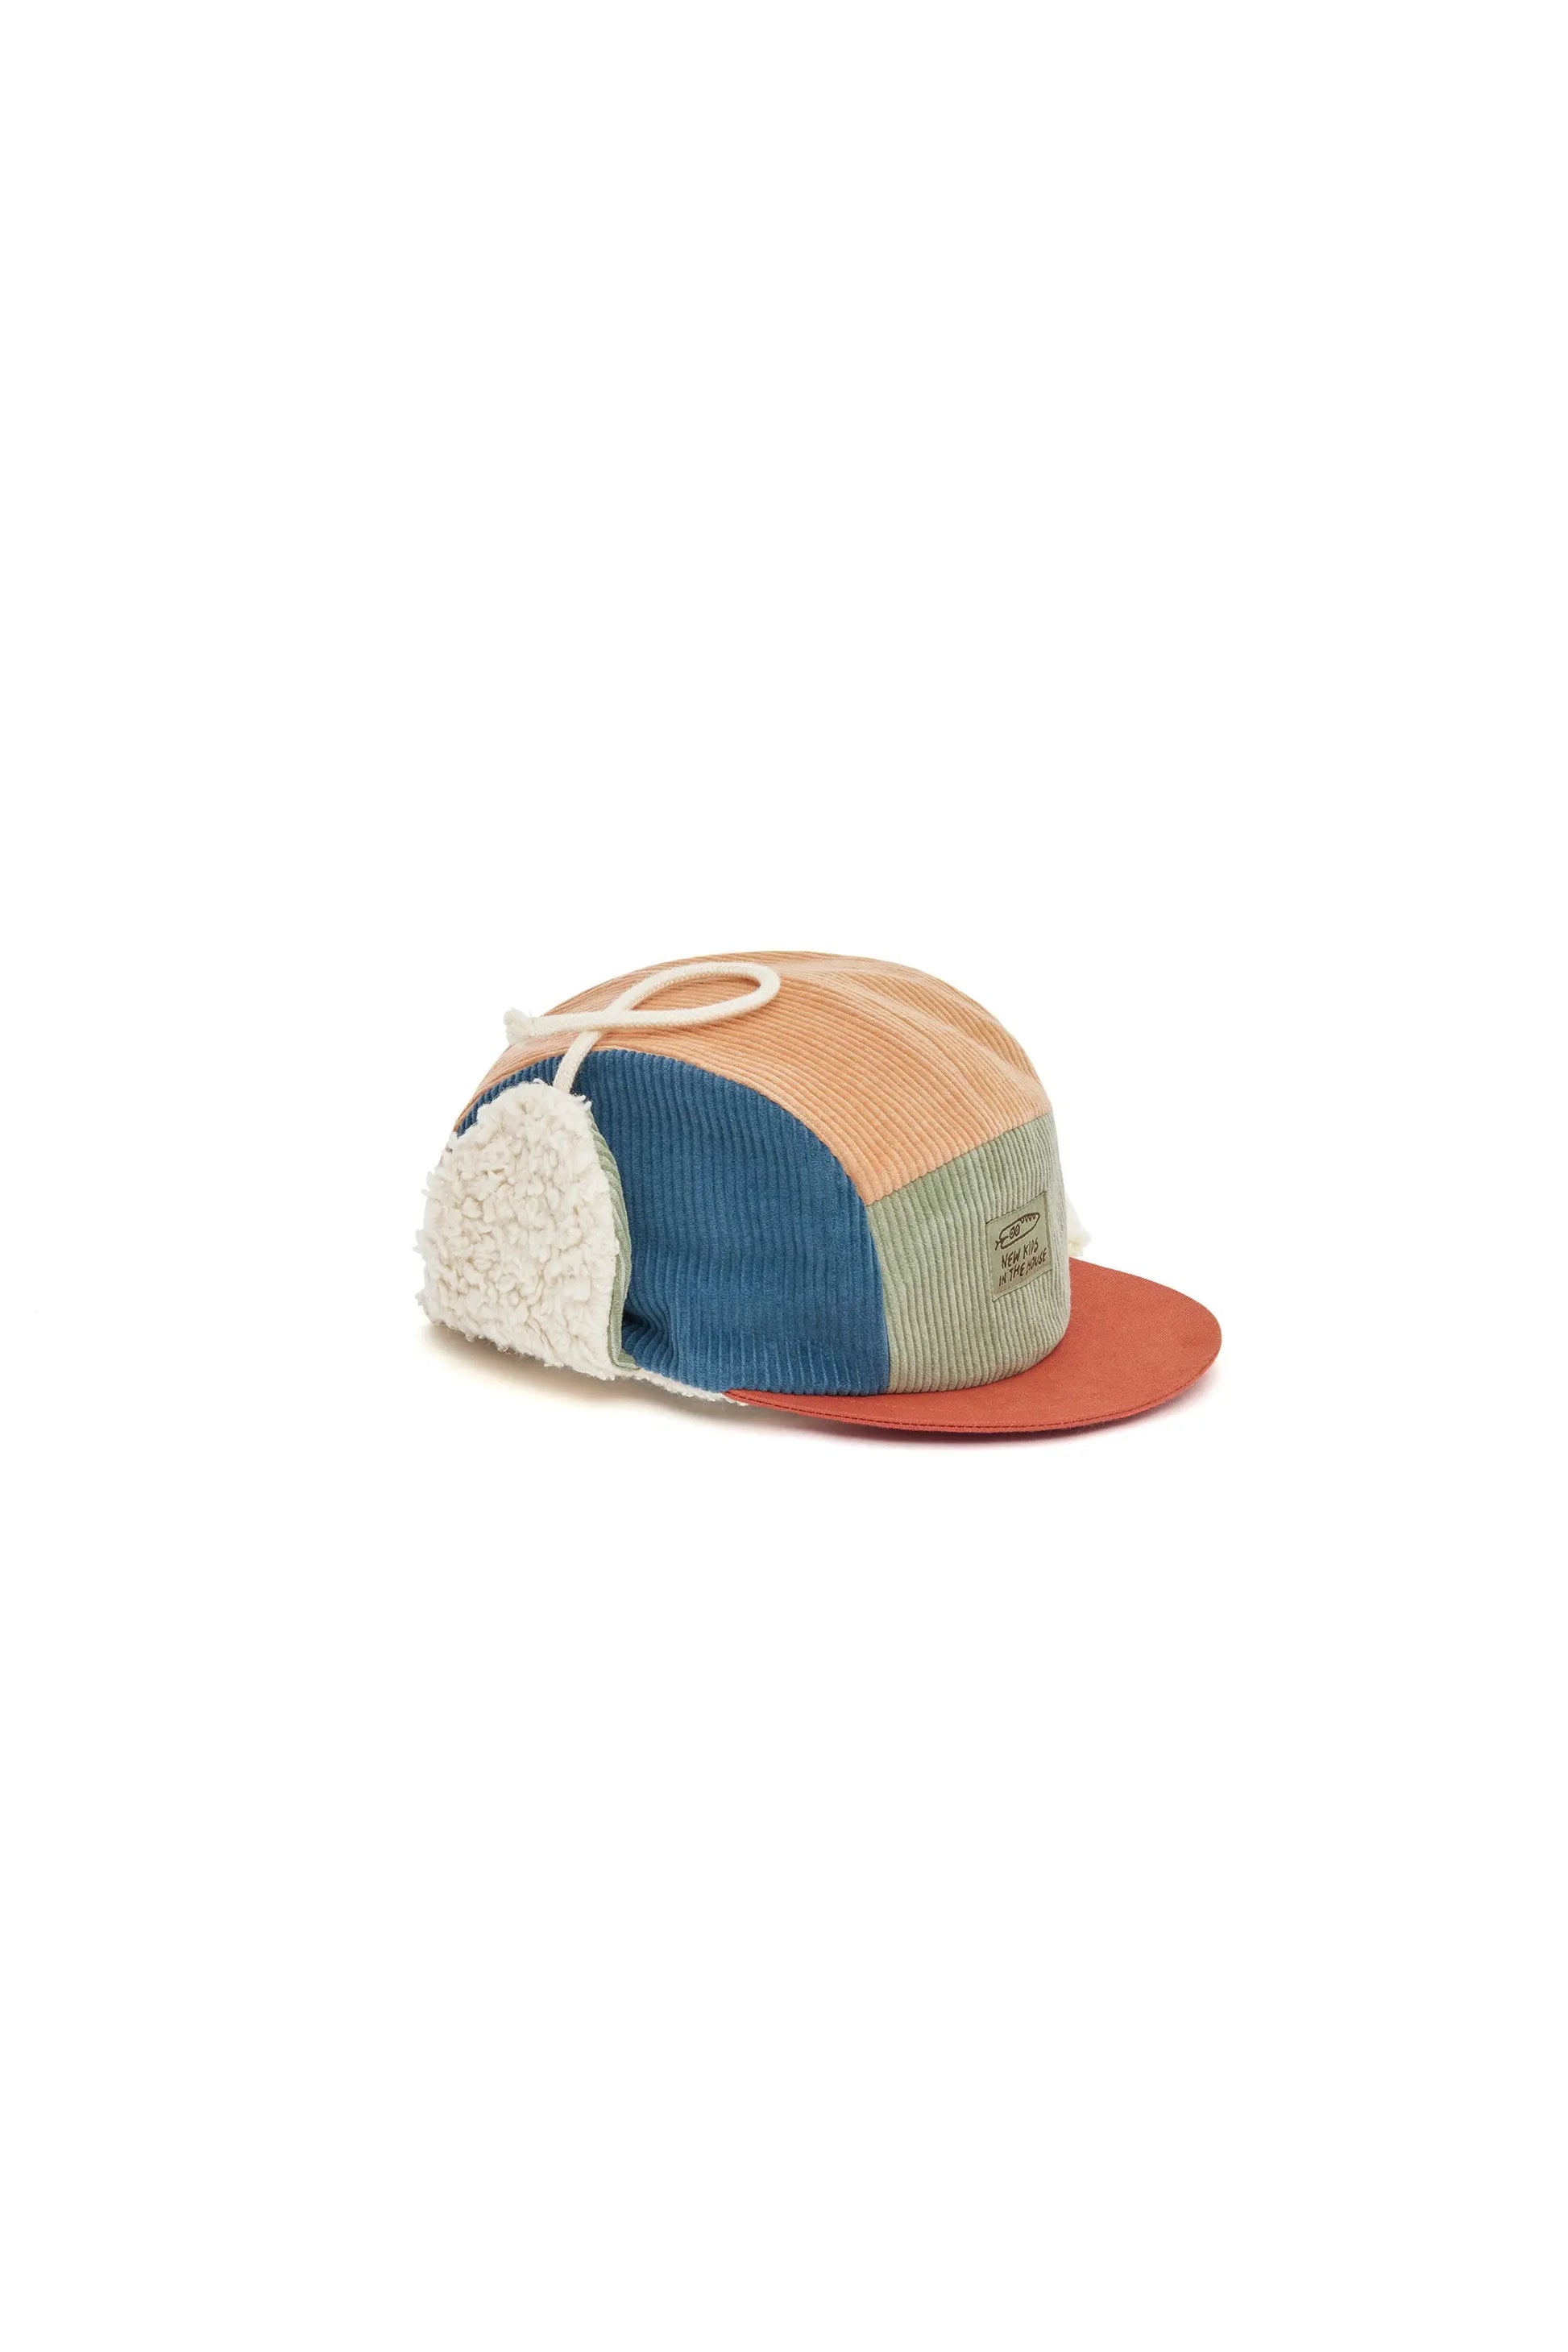 Corduroy 5-Panel Winter Cap with Ear Flaps New Kids In The House